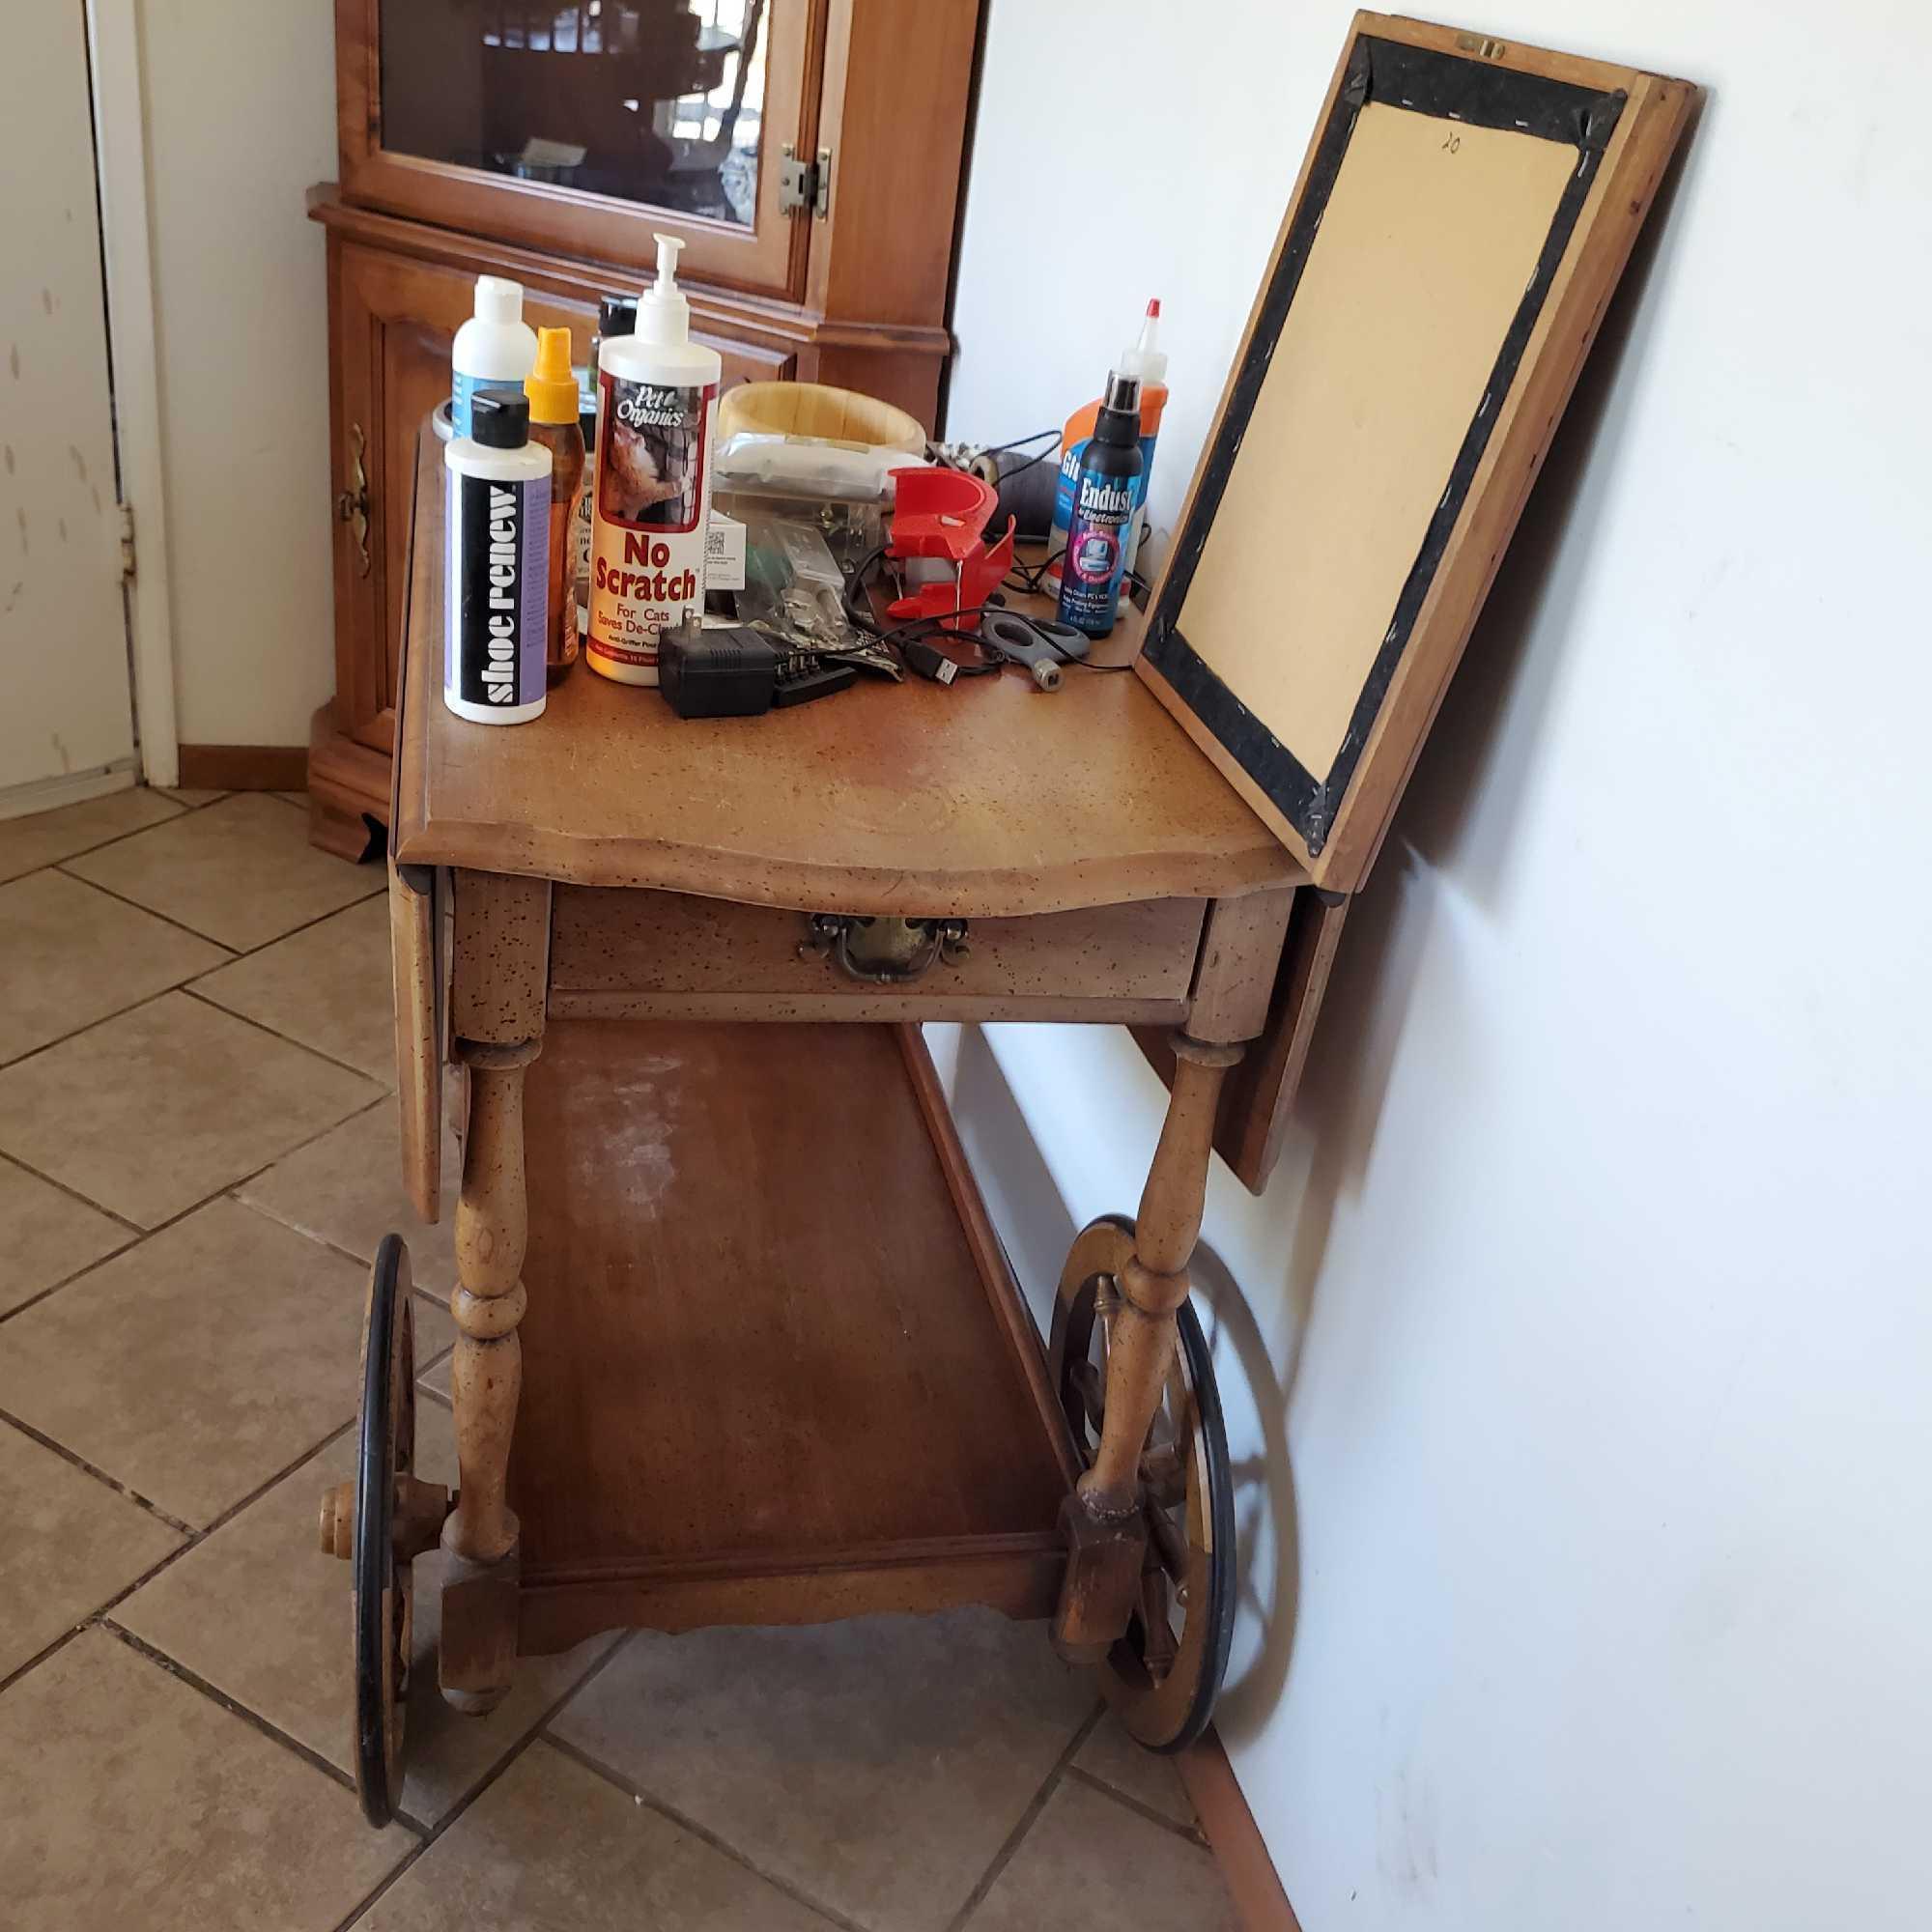 Kitchen Hutch/display vintage wooden tea cart both with contents @ Farm